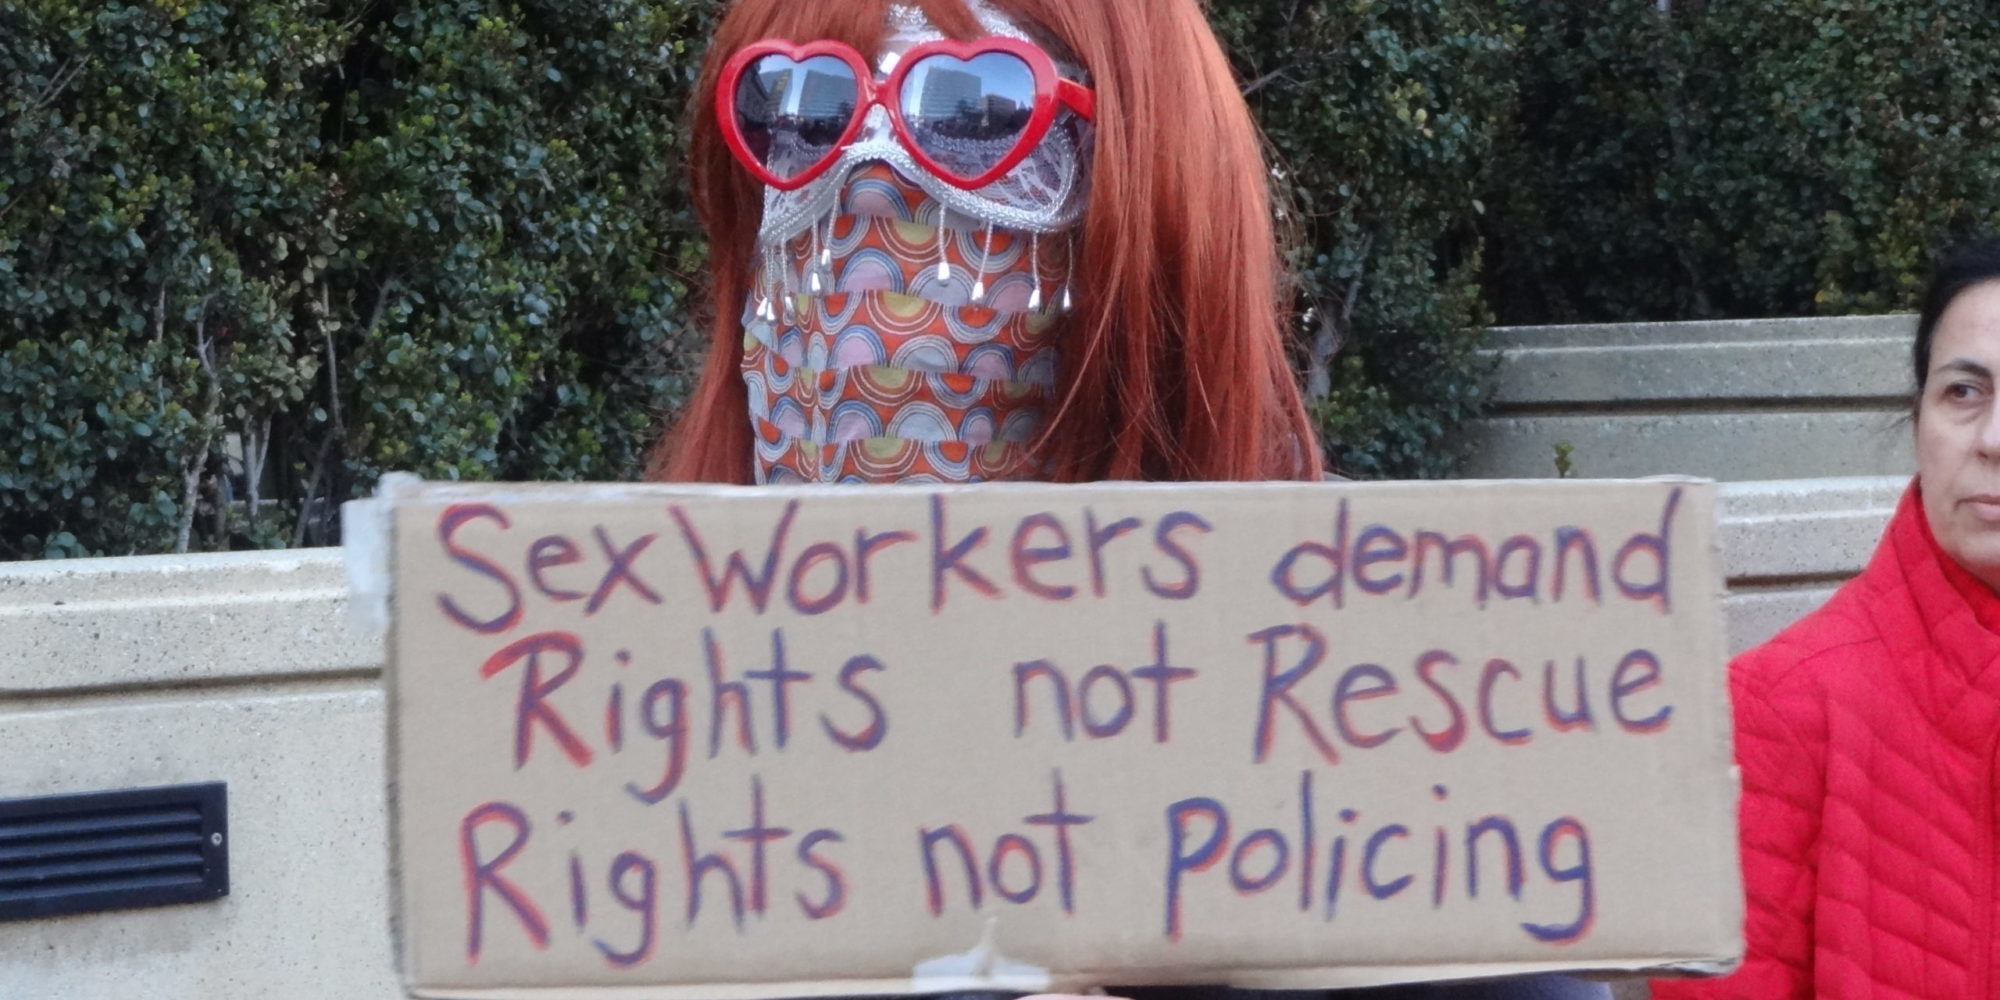 International Sex Workers Rights Day Rights Not Rescue Rabble Ca